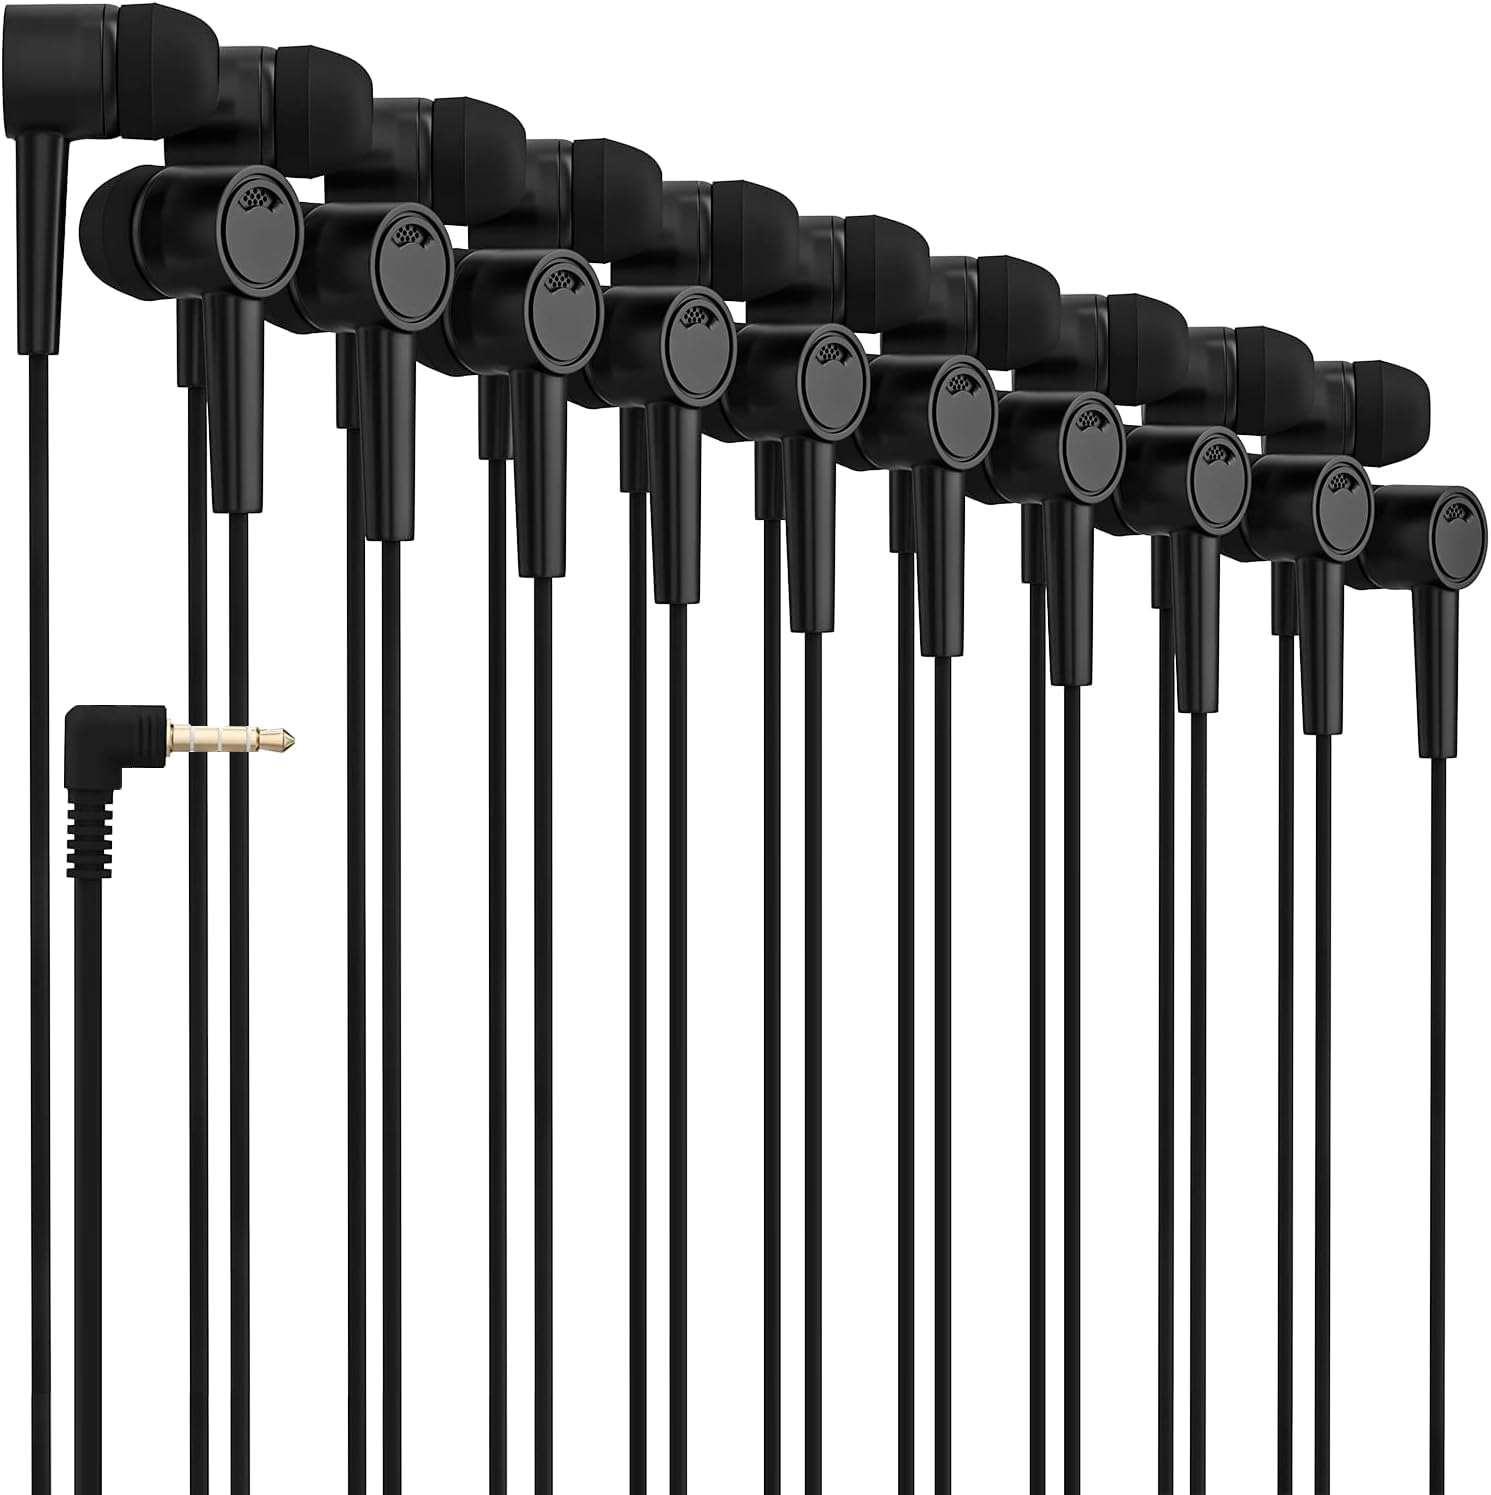 Maeline Bulk 10 Pack Earbuds, Noise Isolating in-Ear Headphones for Classroom, Library, Airplane Travel, 3.5mm Wired Kids Earbuds Earphones for Phones, Computer and Laptops - Black